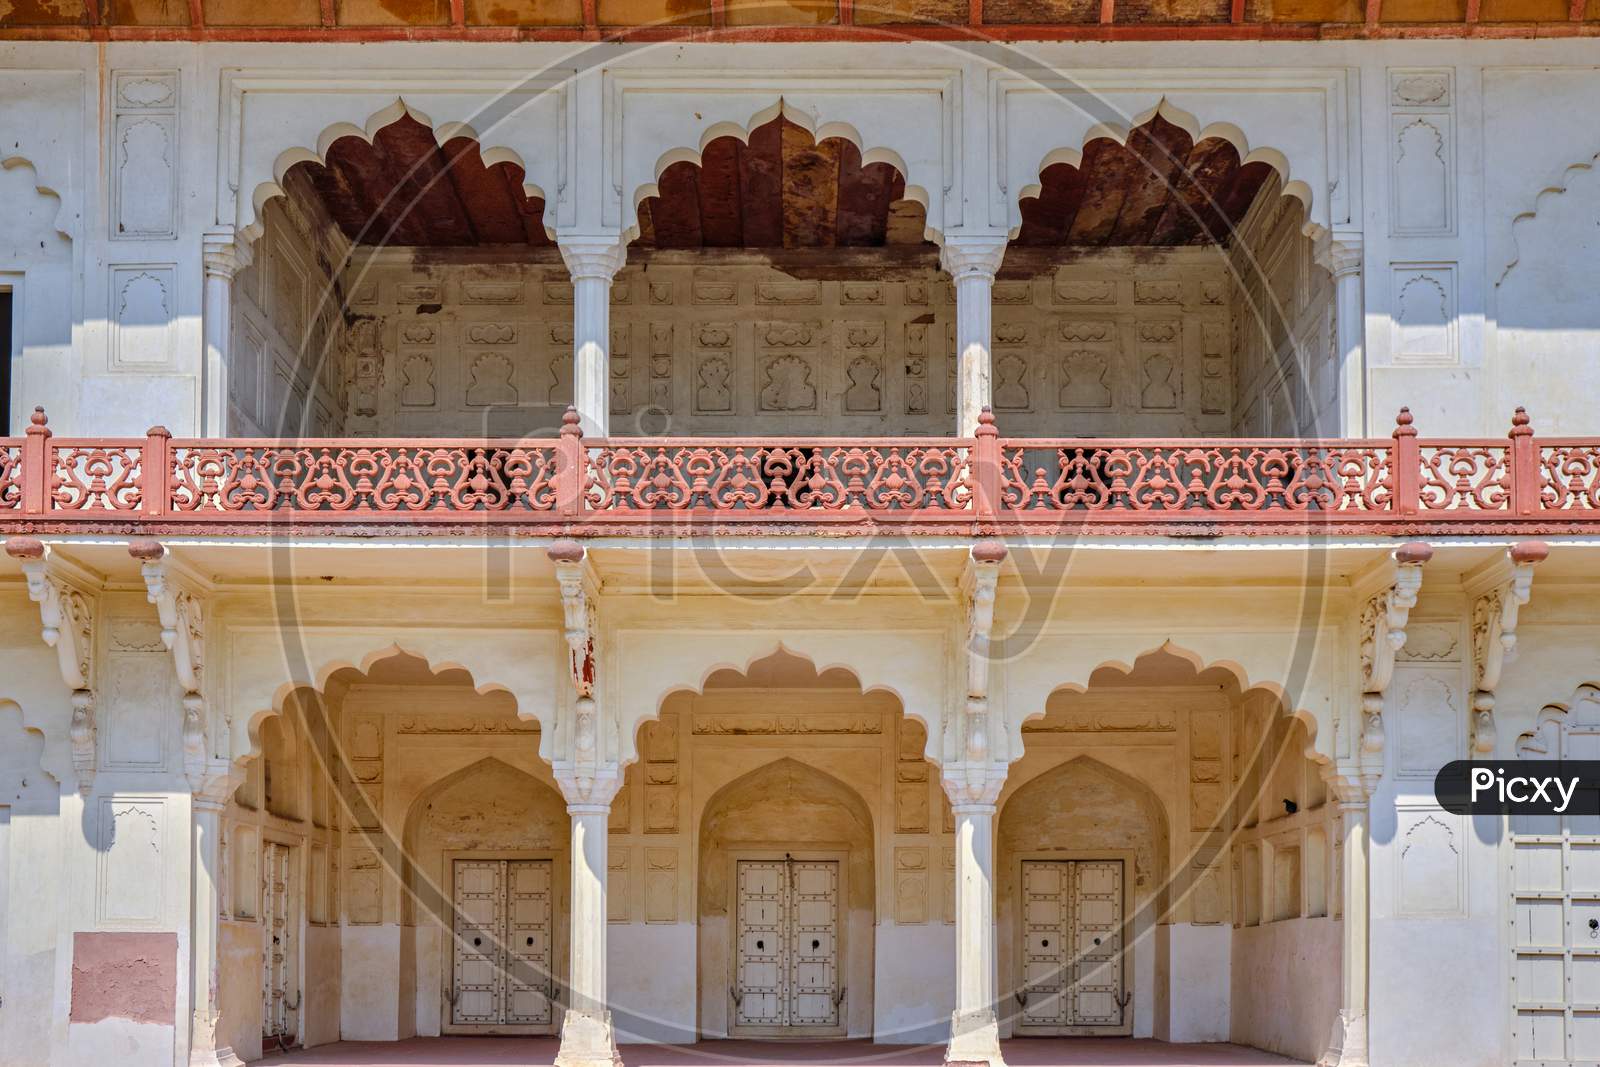 Diwan-I-Khas (Hall Of Private Audiences) Pavilion In Agra Fort, Agra, India